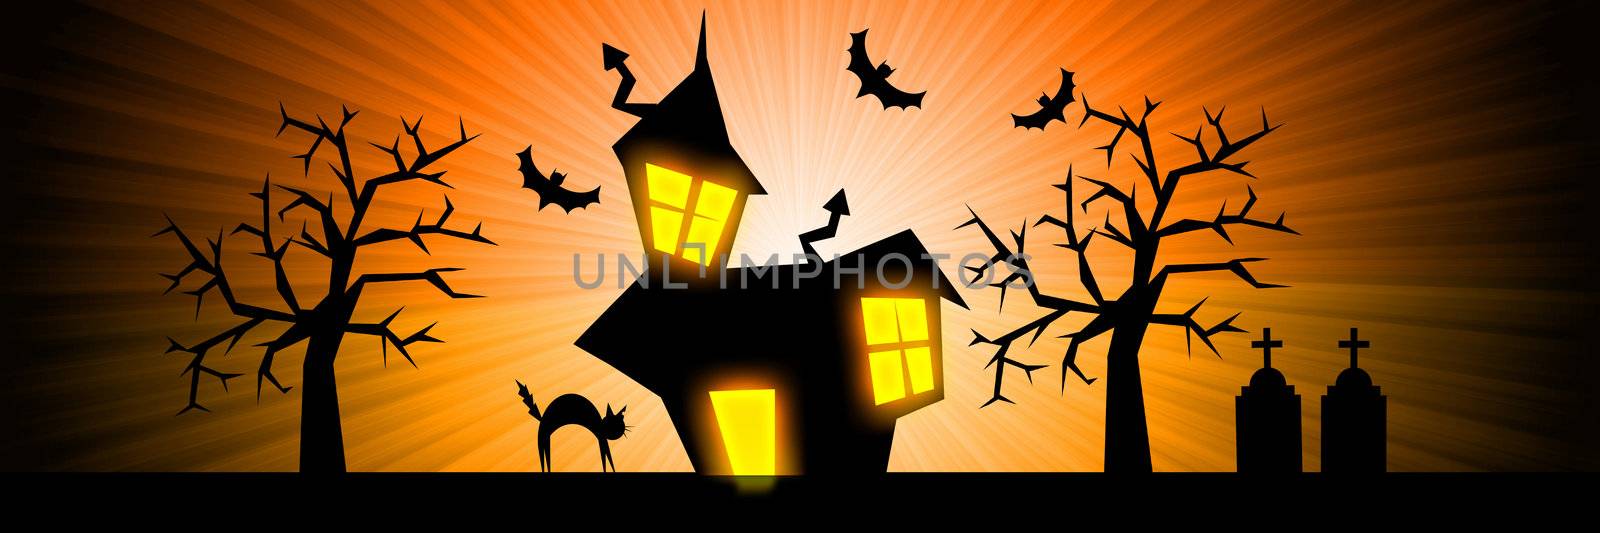 Halloween nightmare rays banner background by cienpies